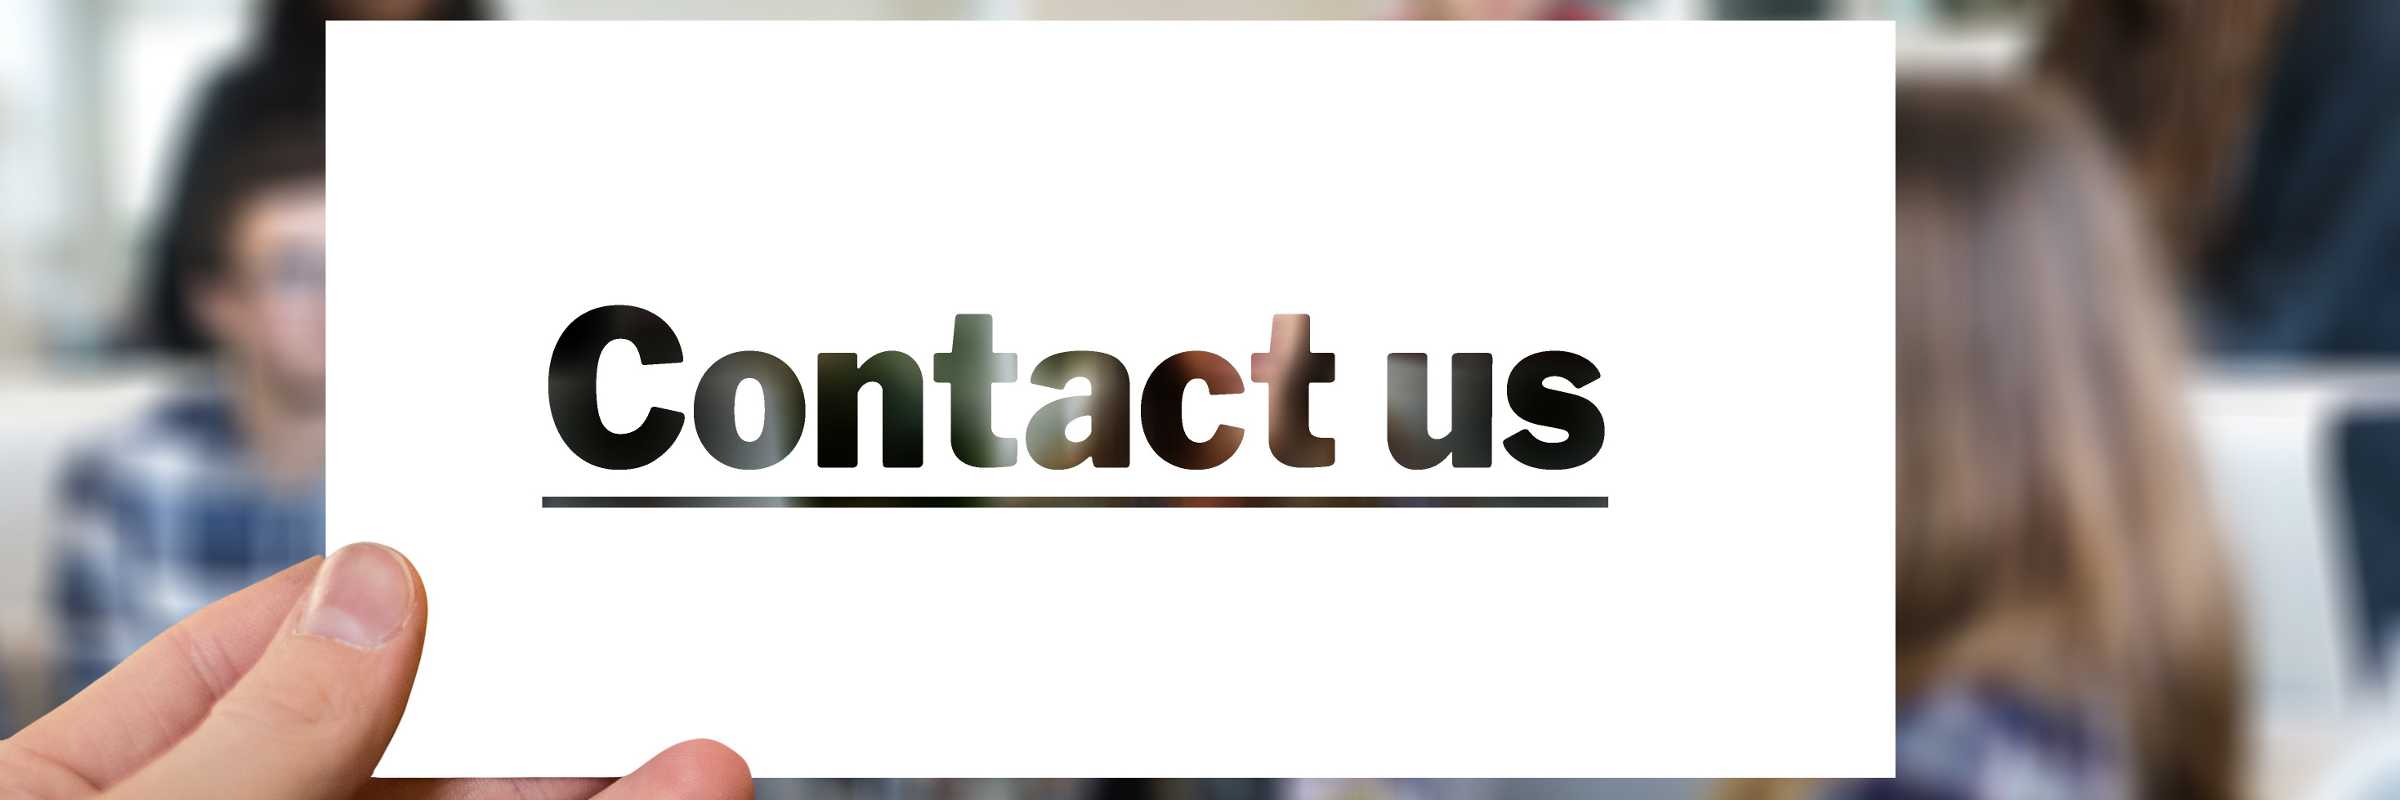 'Contact us' sign